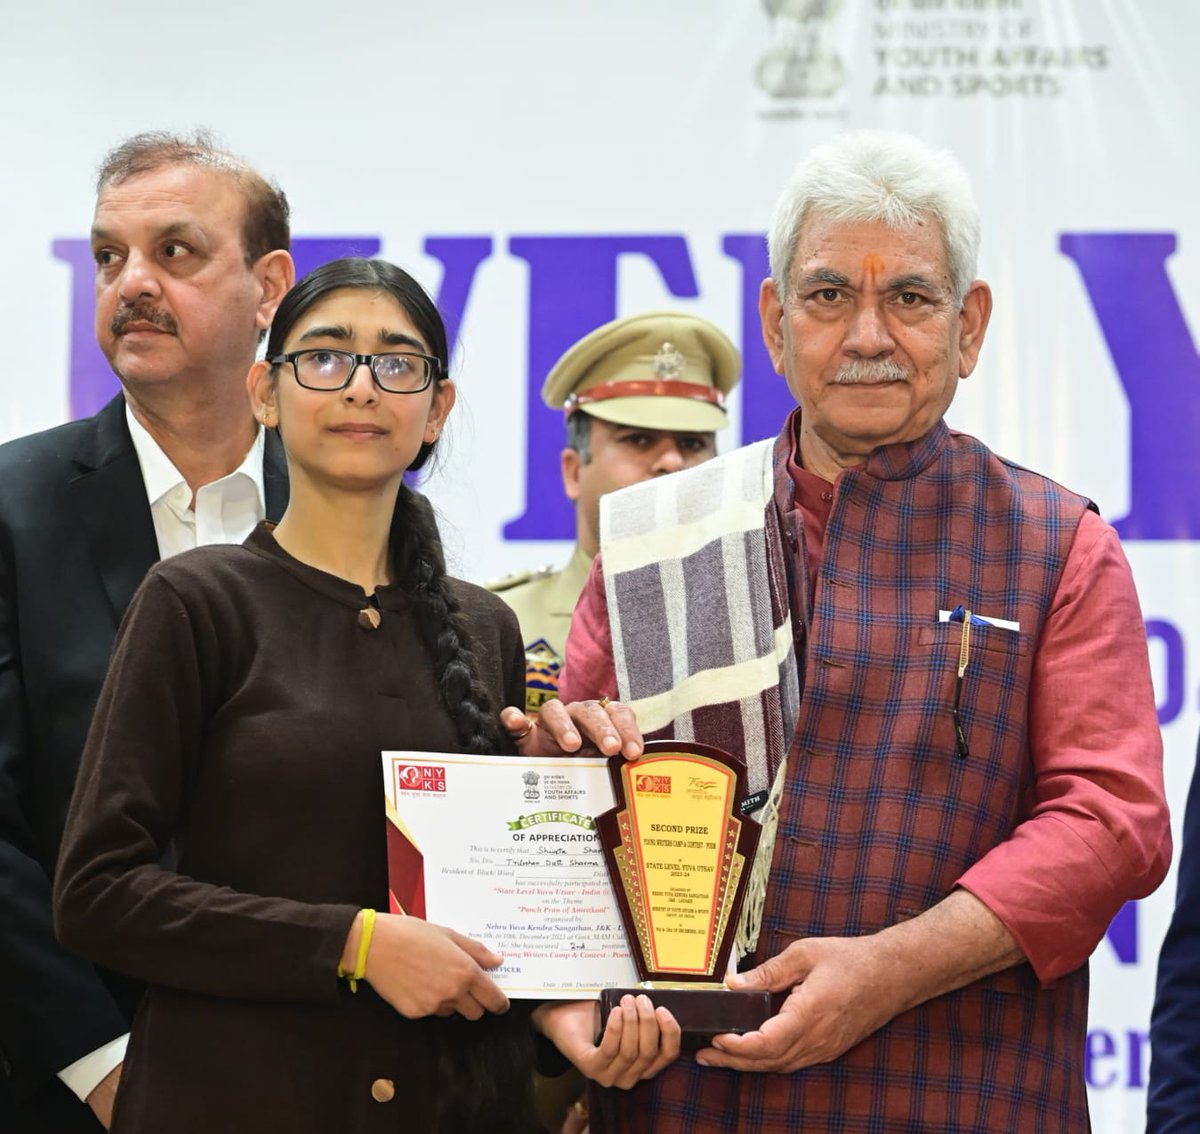 Attended closing ceremony of State level Yuva Utsav: India@2047 organised by Ministry of Youth Affairs and Sports through NYKS. Congratulations to winners. Taking inspiration from Hon'ble PM Shri Narendra Modi Ji's Panch Pran, Yuva Utsav had integrated 5-youth centric programmes.